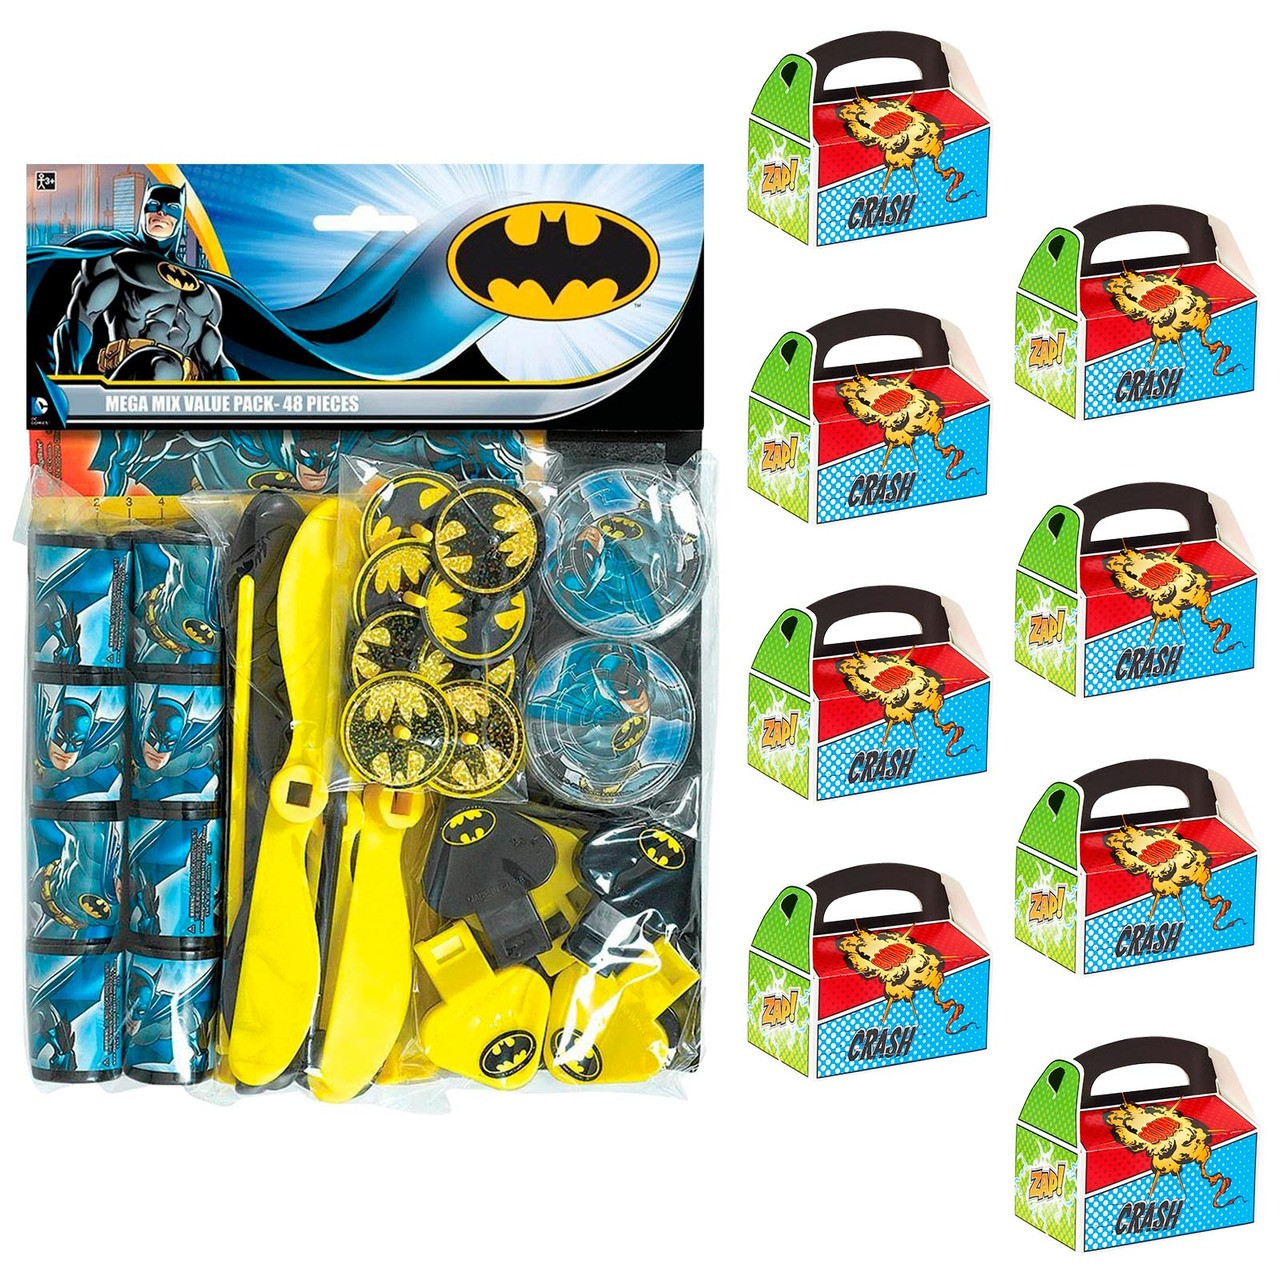 Batman Filled Favor Box Kit (For 8 Guests) - ThePartyWorks